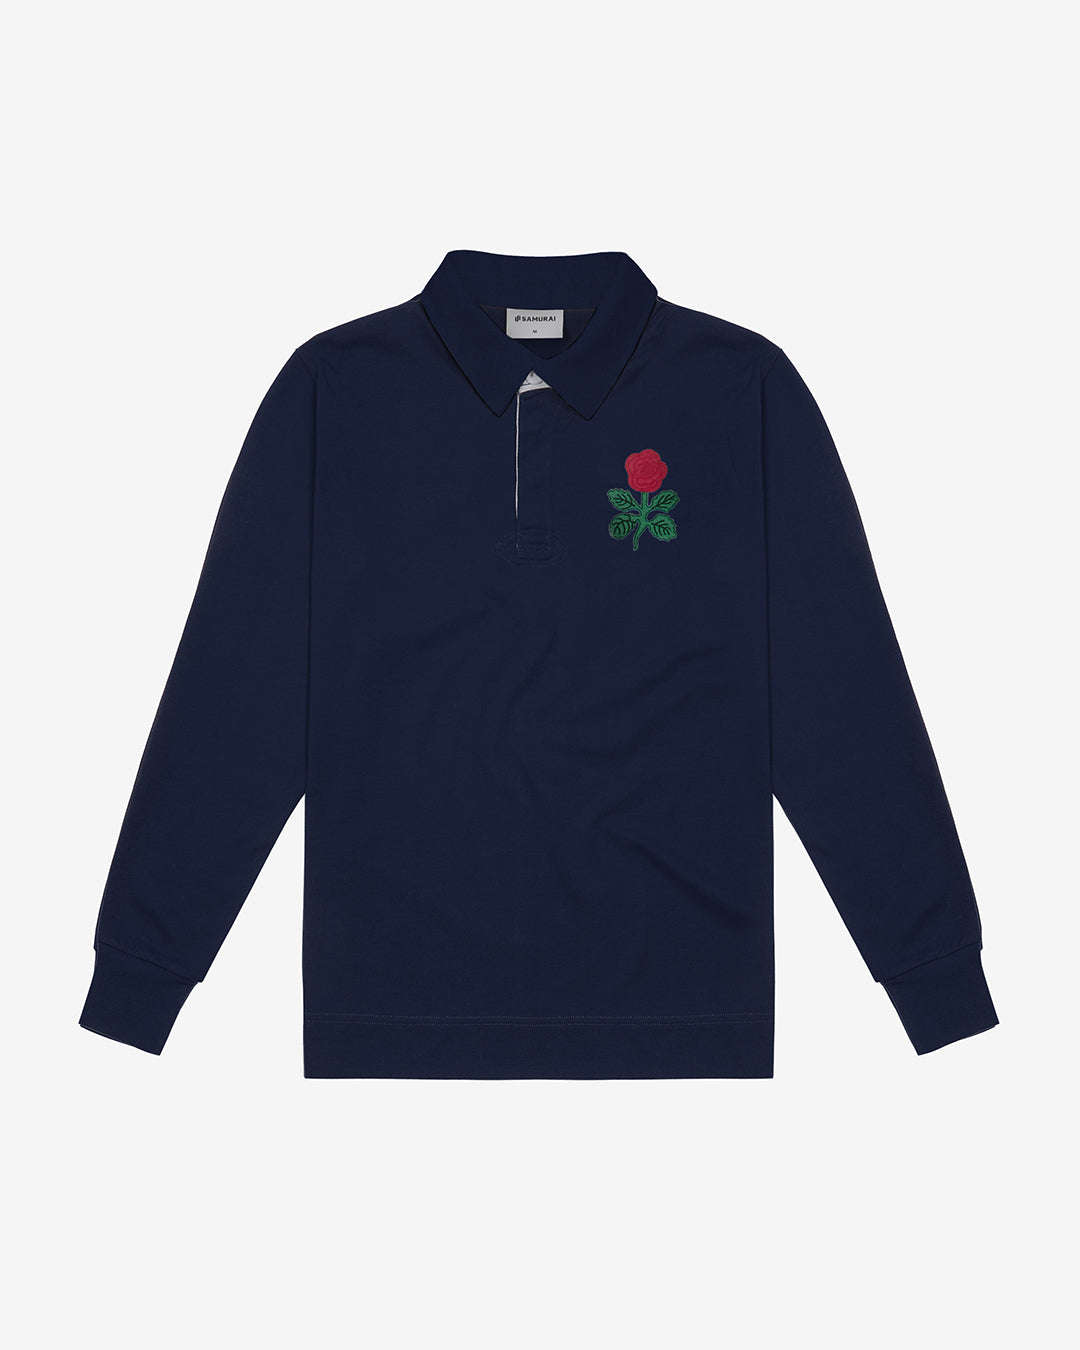 VC: GB-ENG - Women's Vintage Navy Rugby Shirt - England